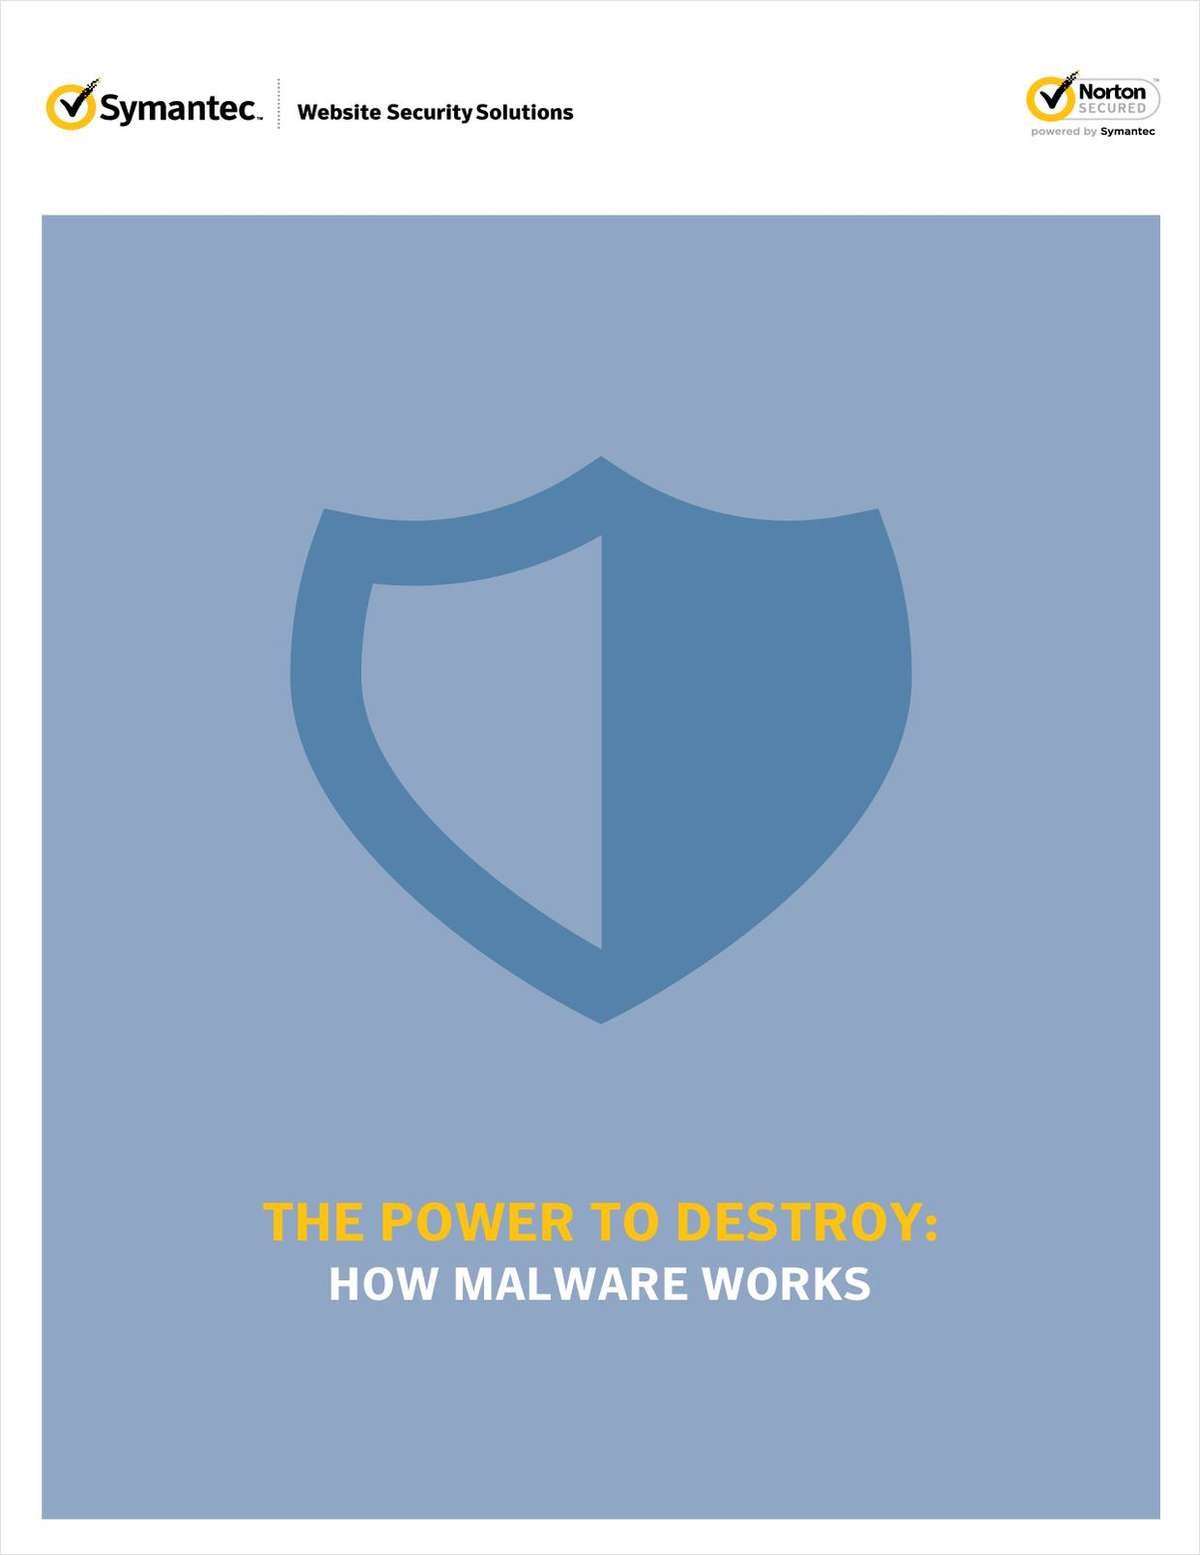 The Power to Destroy: How Malware Works